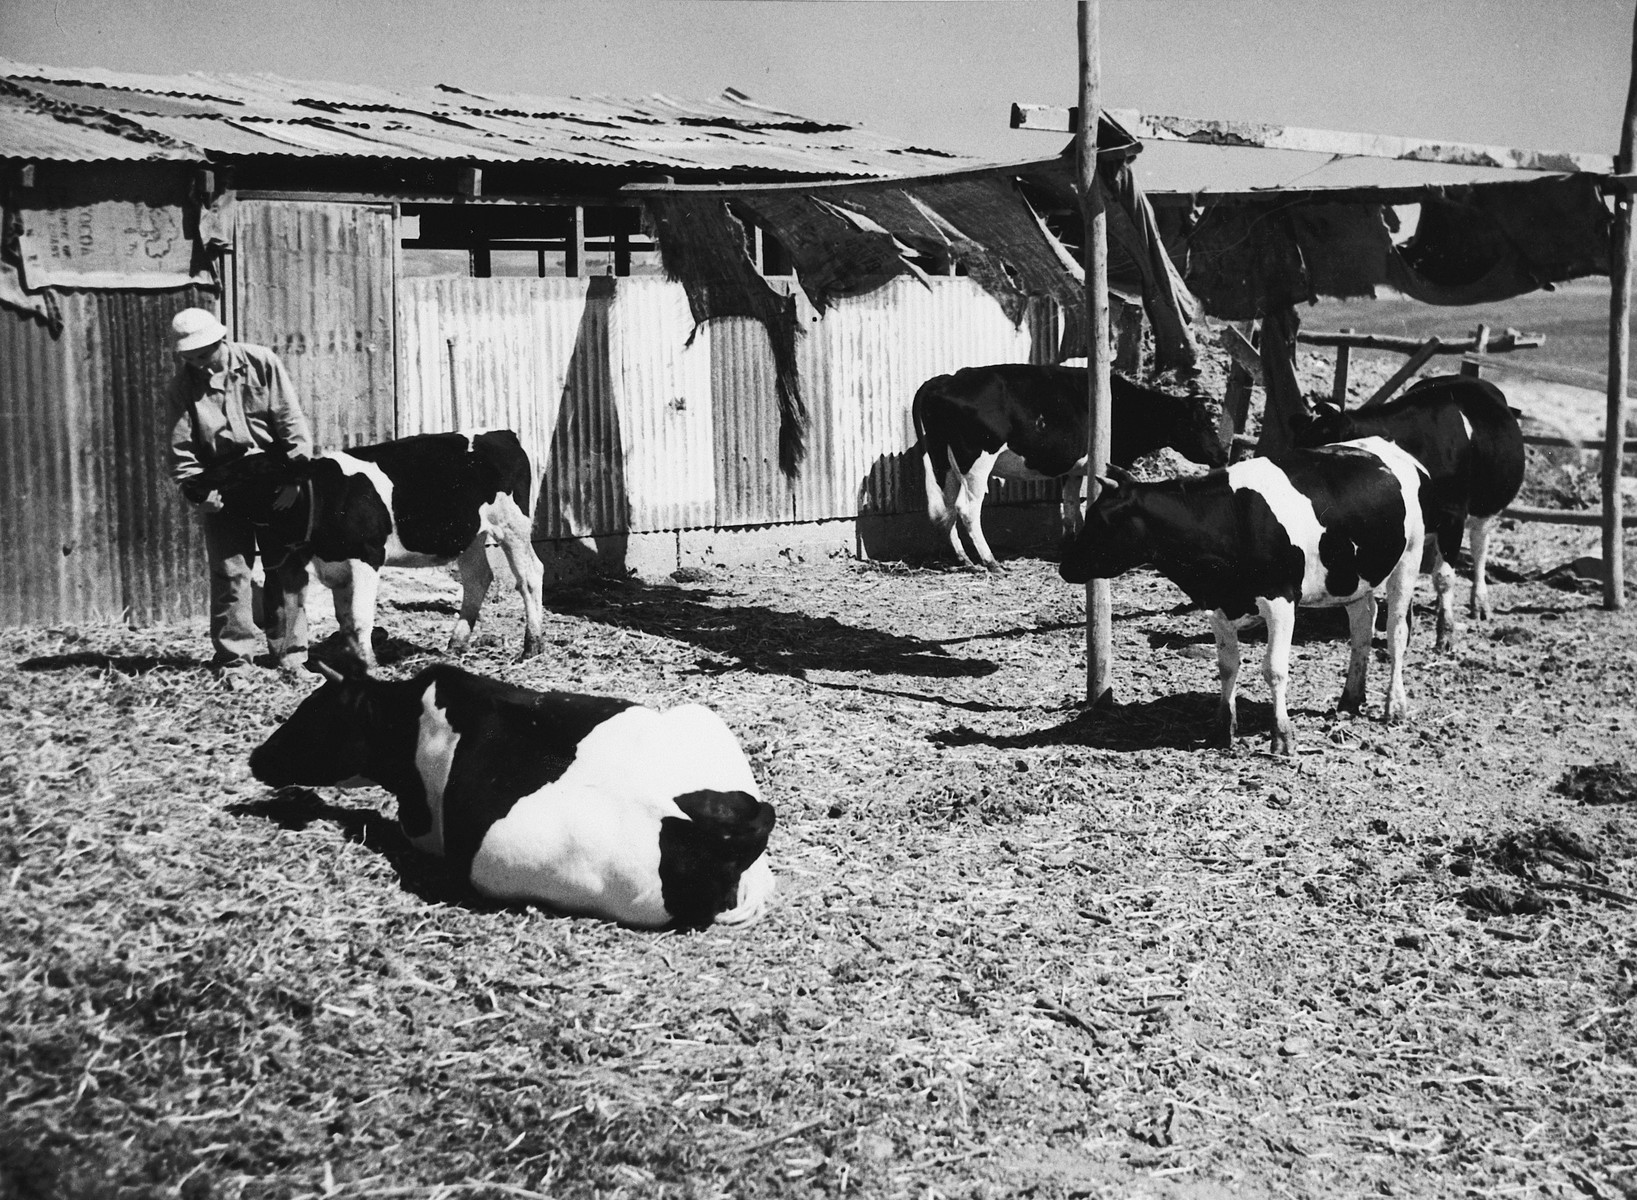 A new immigrant tends the cows in Tal Shachar.